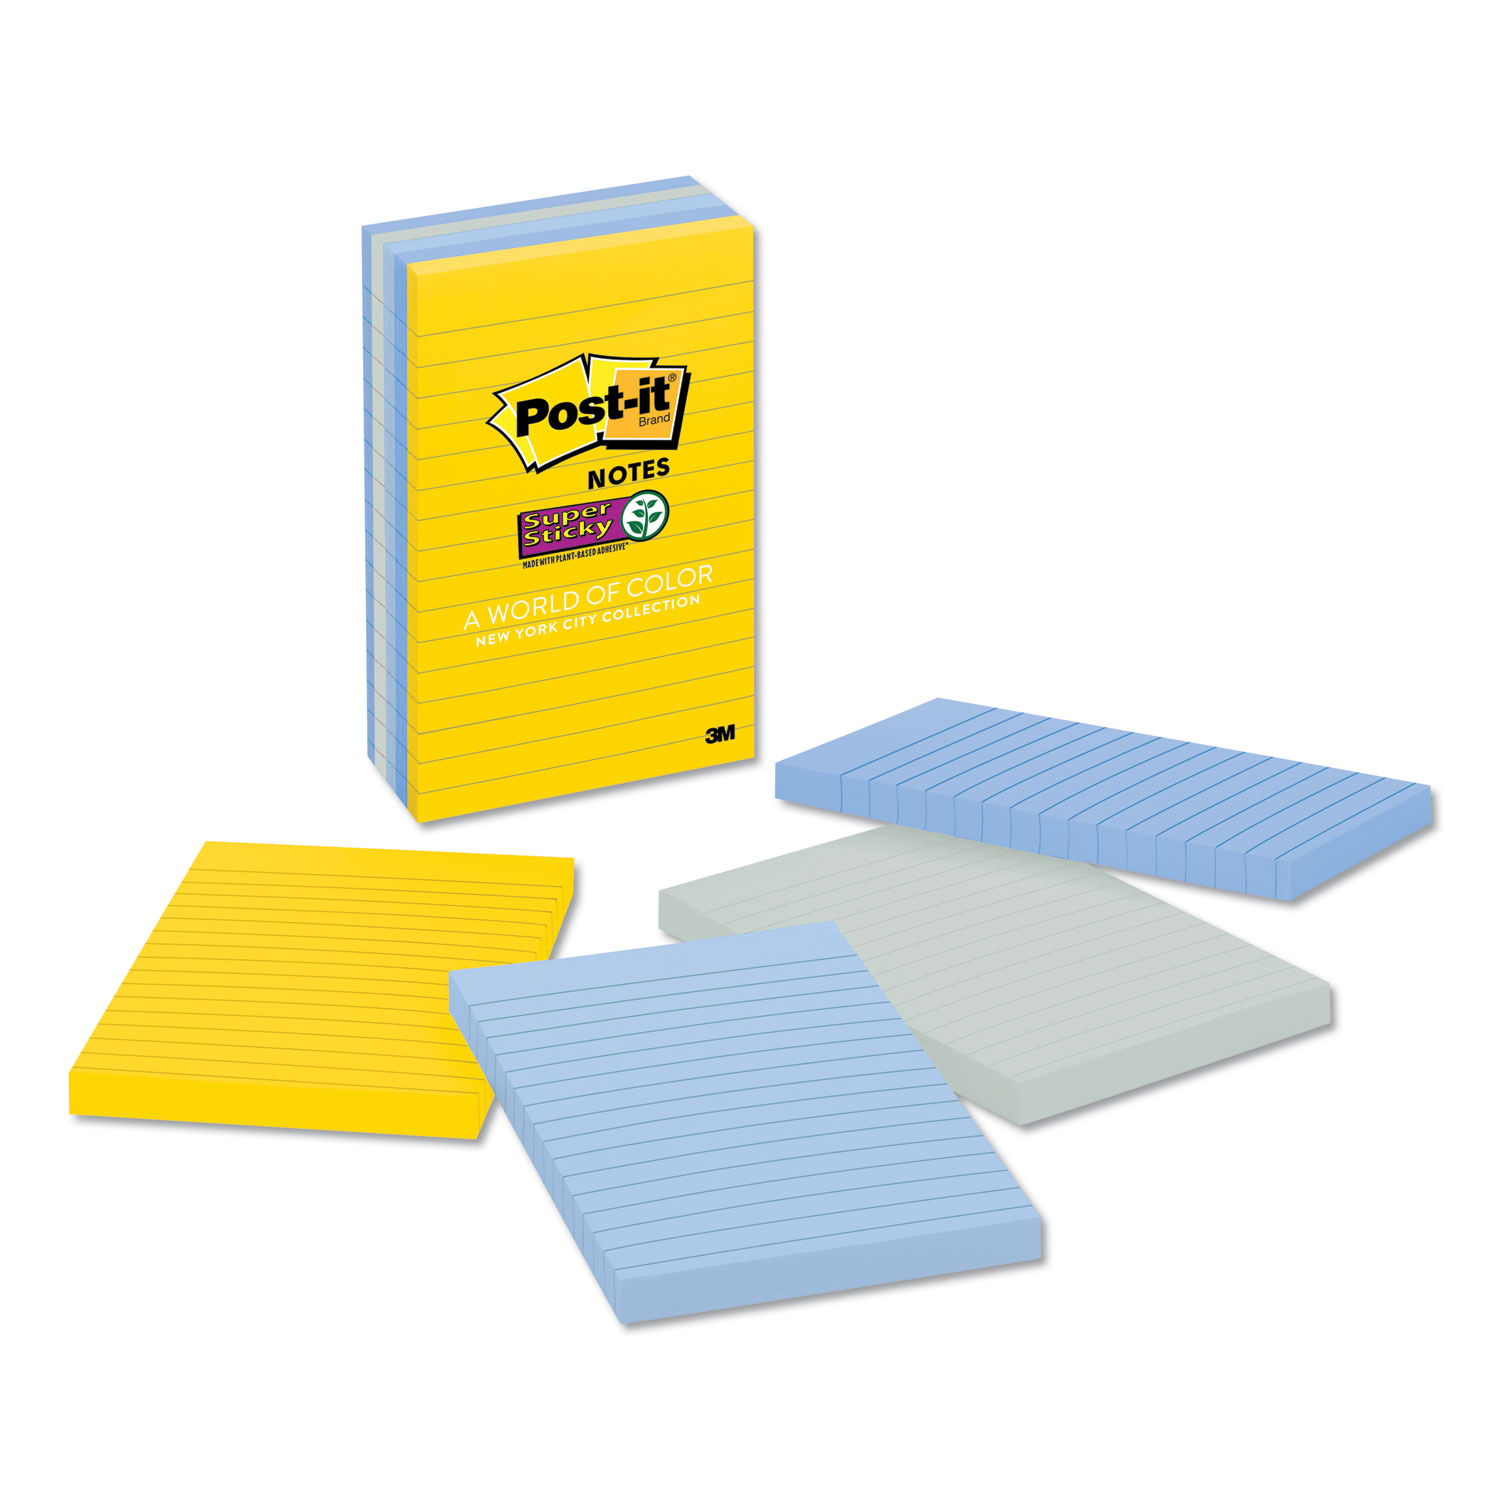  Post-it Notes Super Sticky 6605SSNY Pads in New York Colors Notes, 4 x 6, 90-Sheets/Pad, 5 Pads/Pack (MMM6605SSNY) 